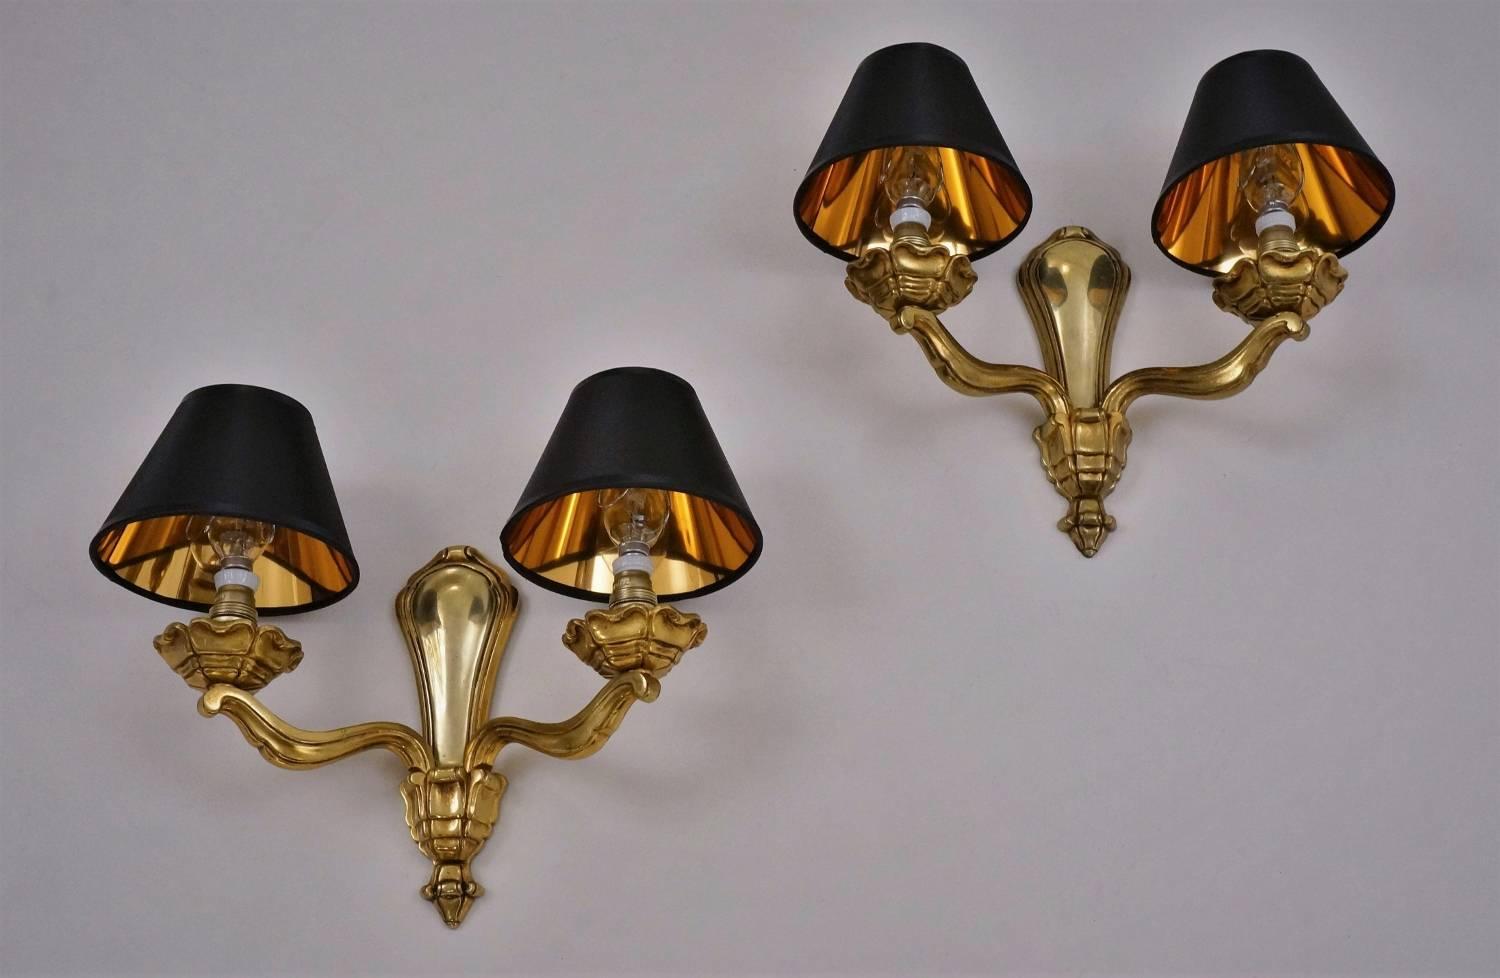 Maison Bagues wall lights, quality bronze casting with gold plated gilt, circa 1940s, French.

Both lights thoroughly cleaned respecting the antique patina. Newly rewired & earthed, new fitted brass & porcelain lamp holders. Both lights are in